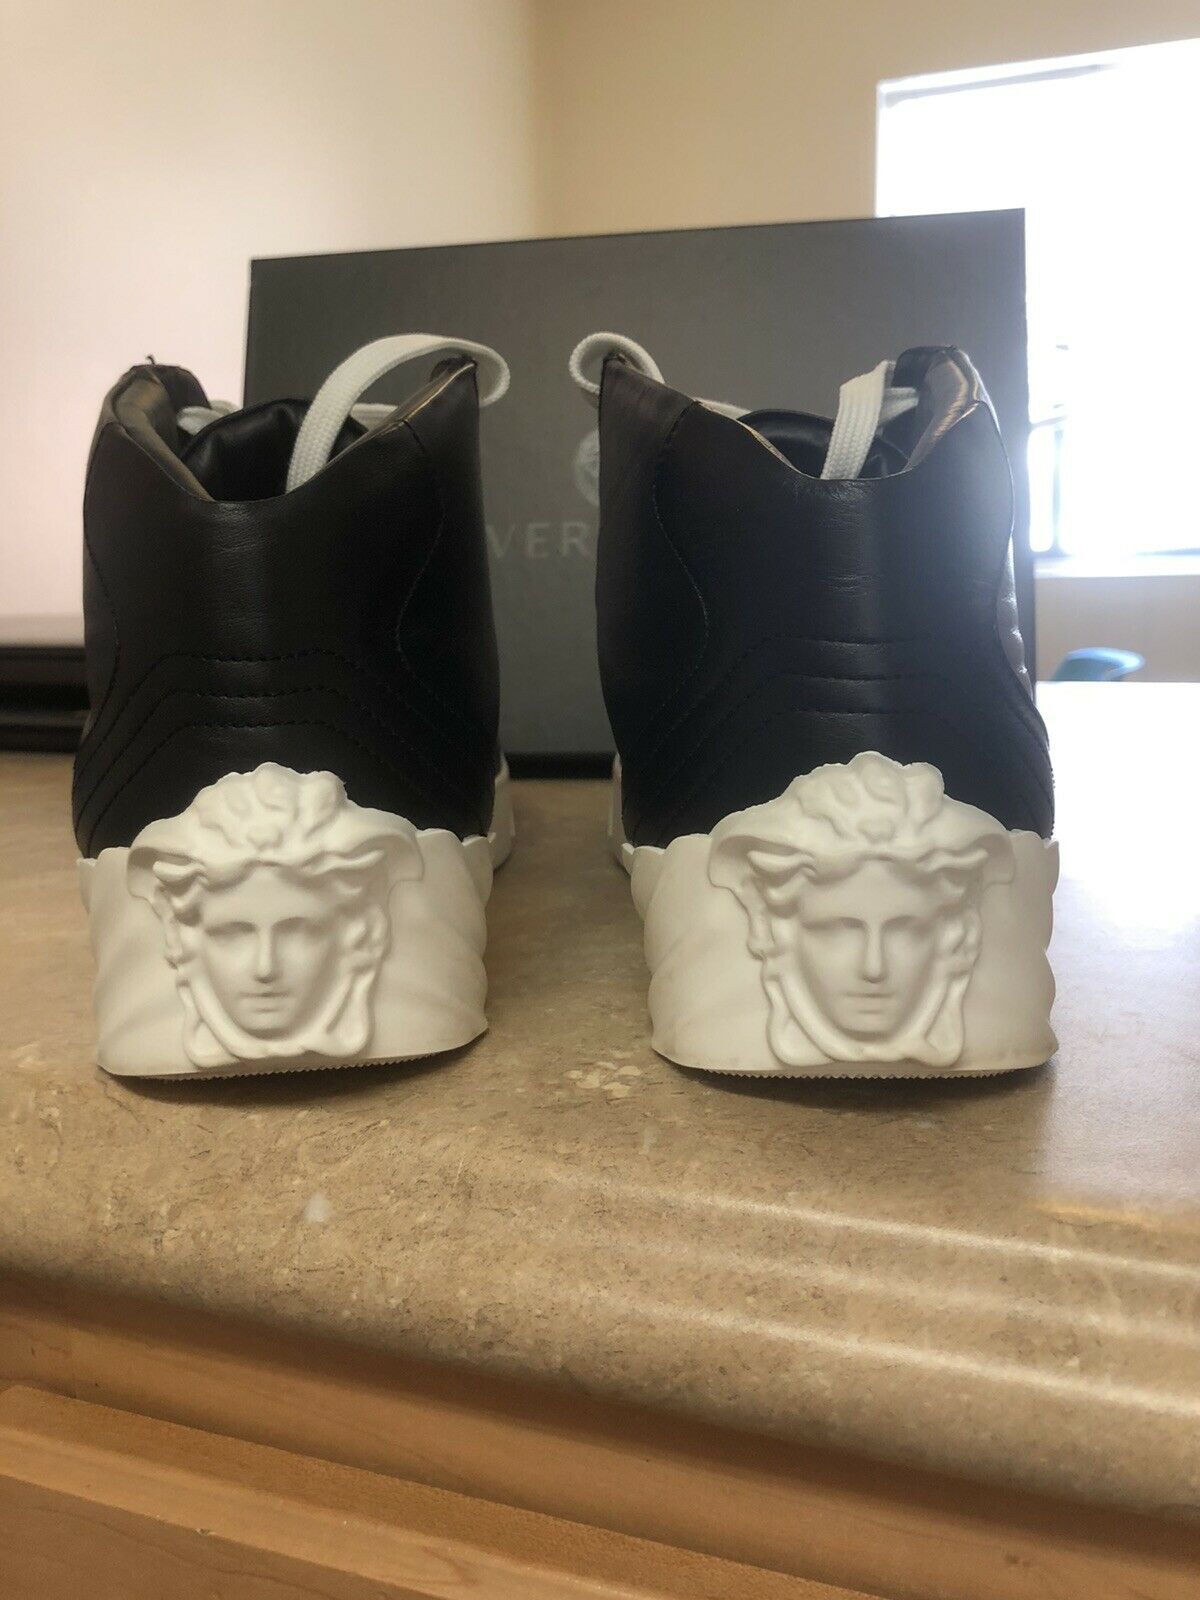 Versace 3D Medusa Head Hightop Leather Shoes Absolutely Sick with box!